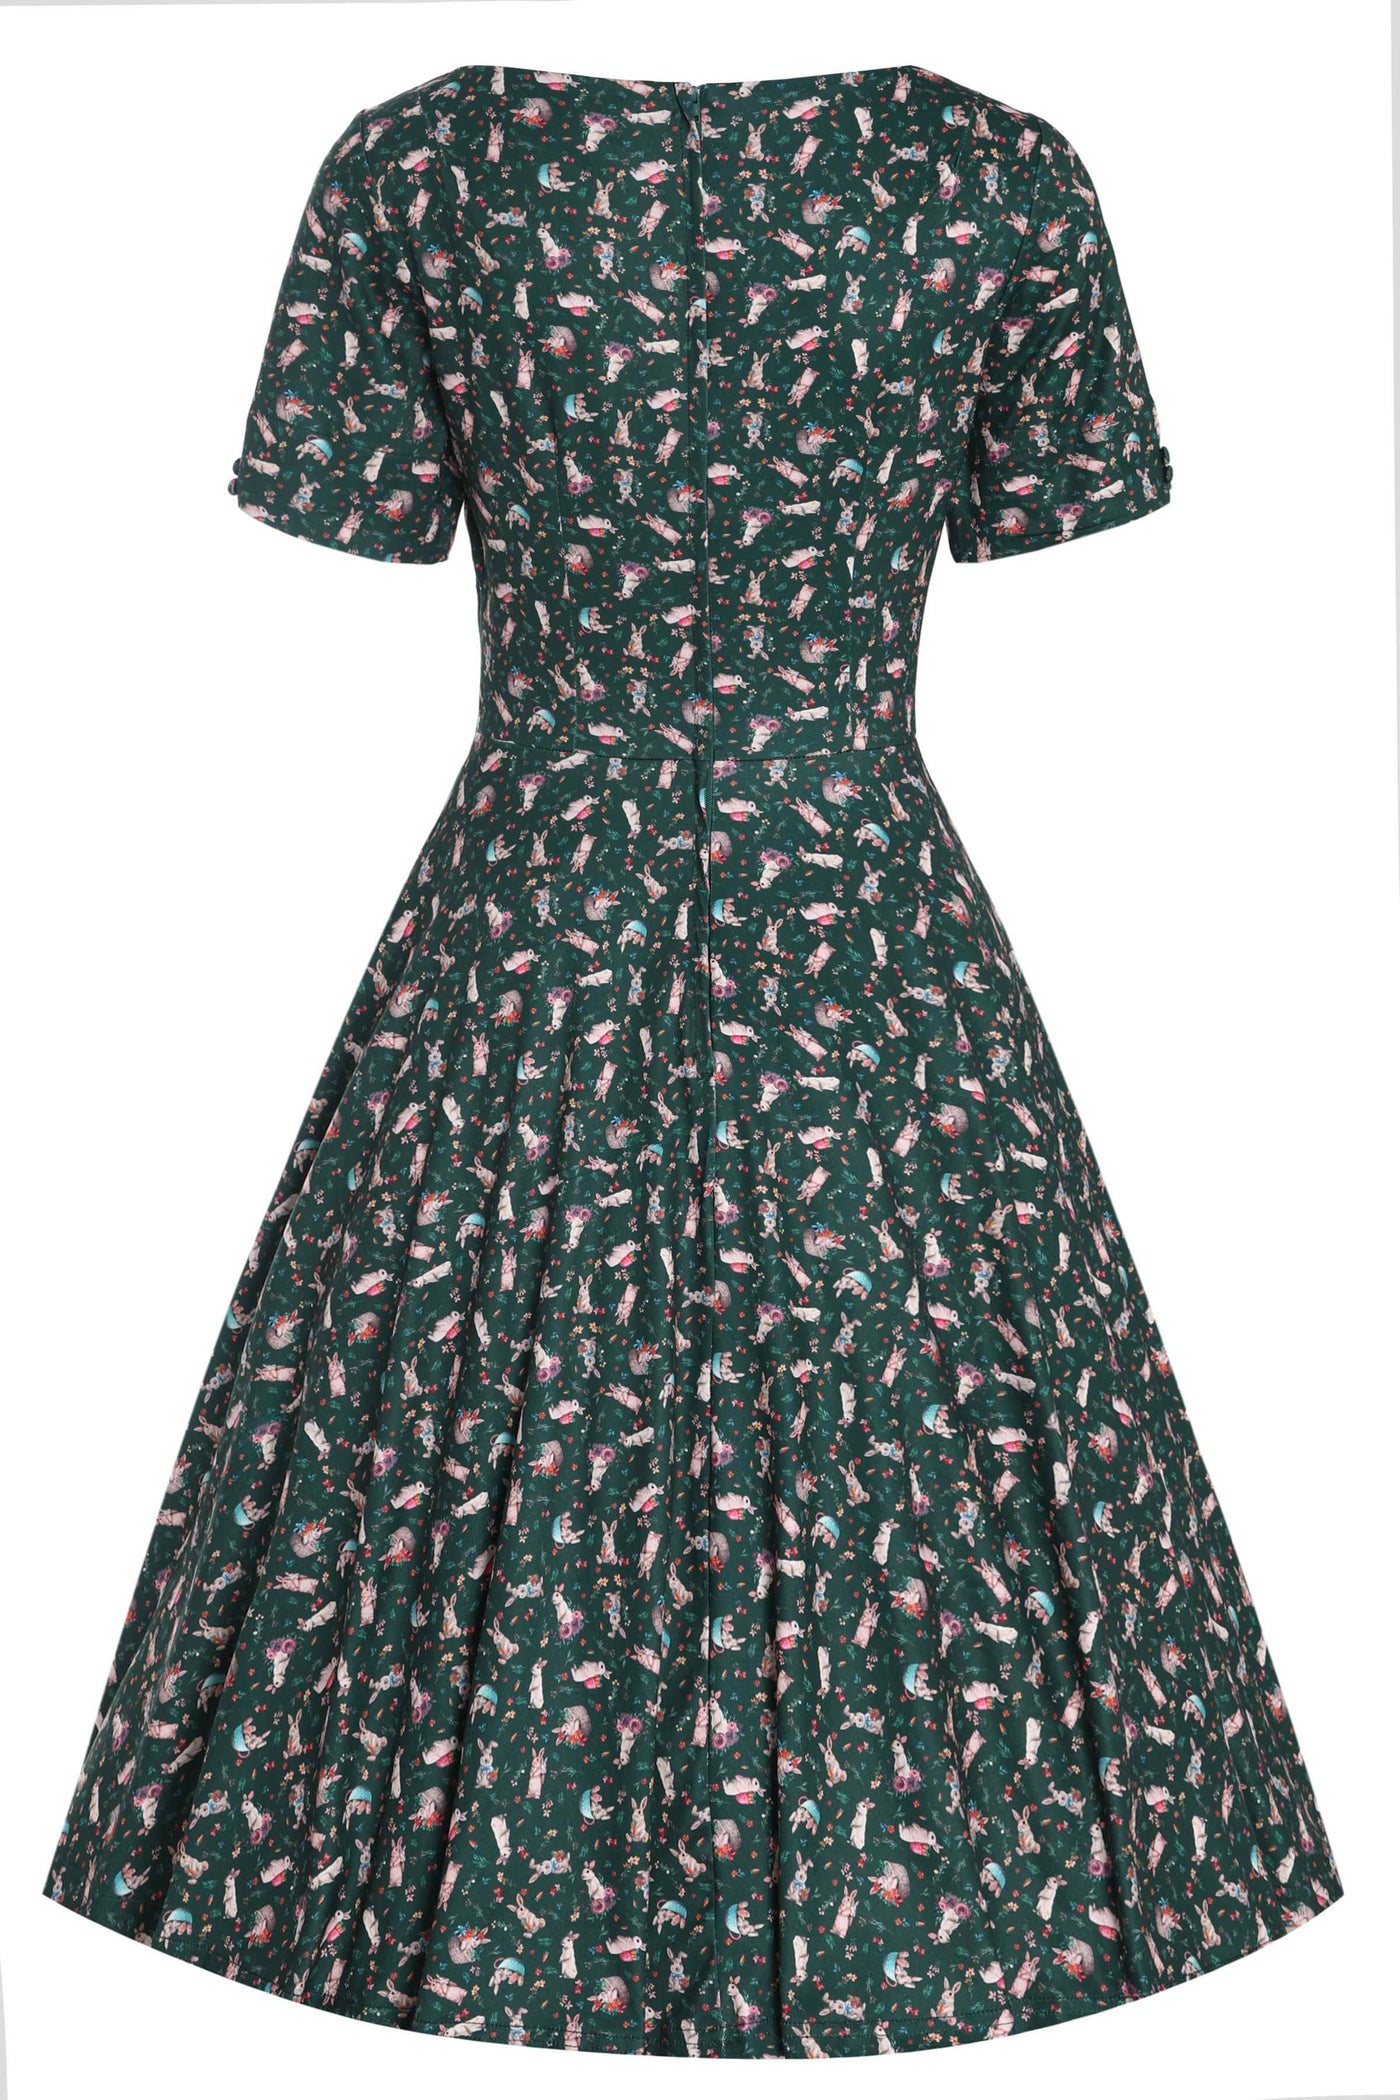 Back View of Bunny Print Flared Dress in Green